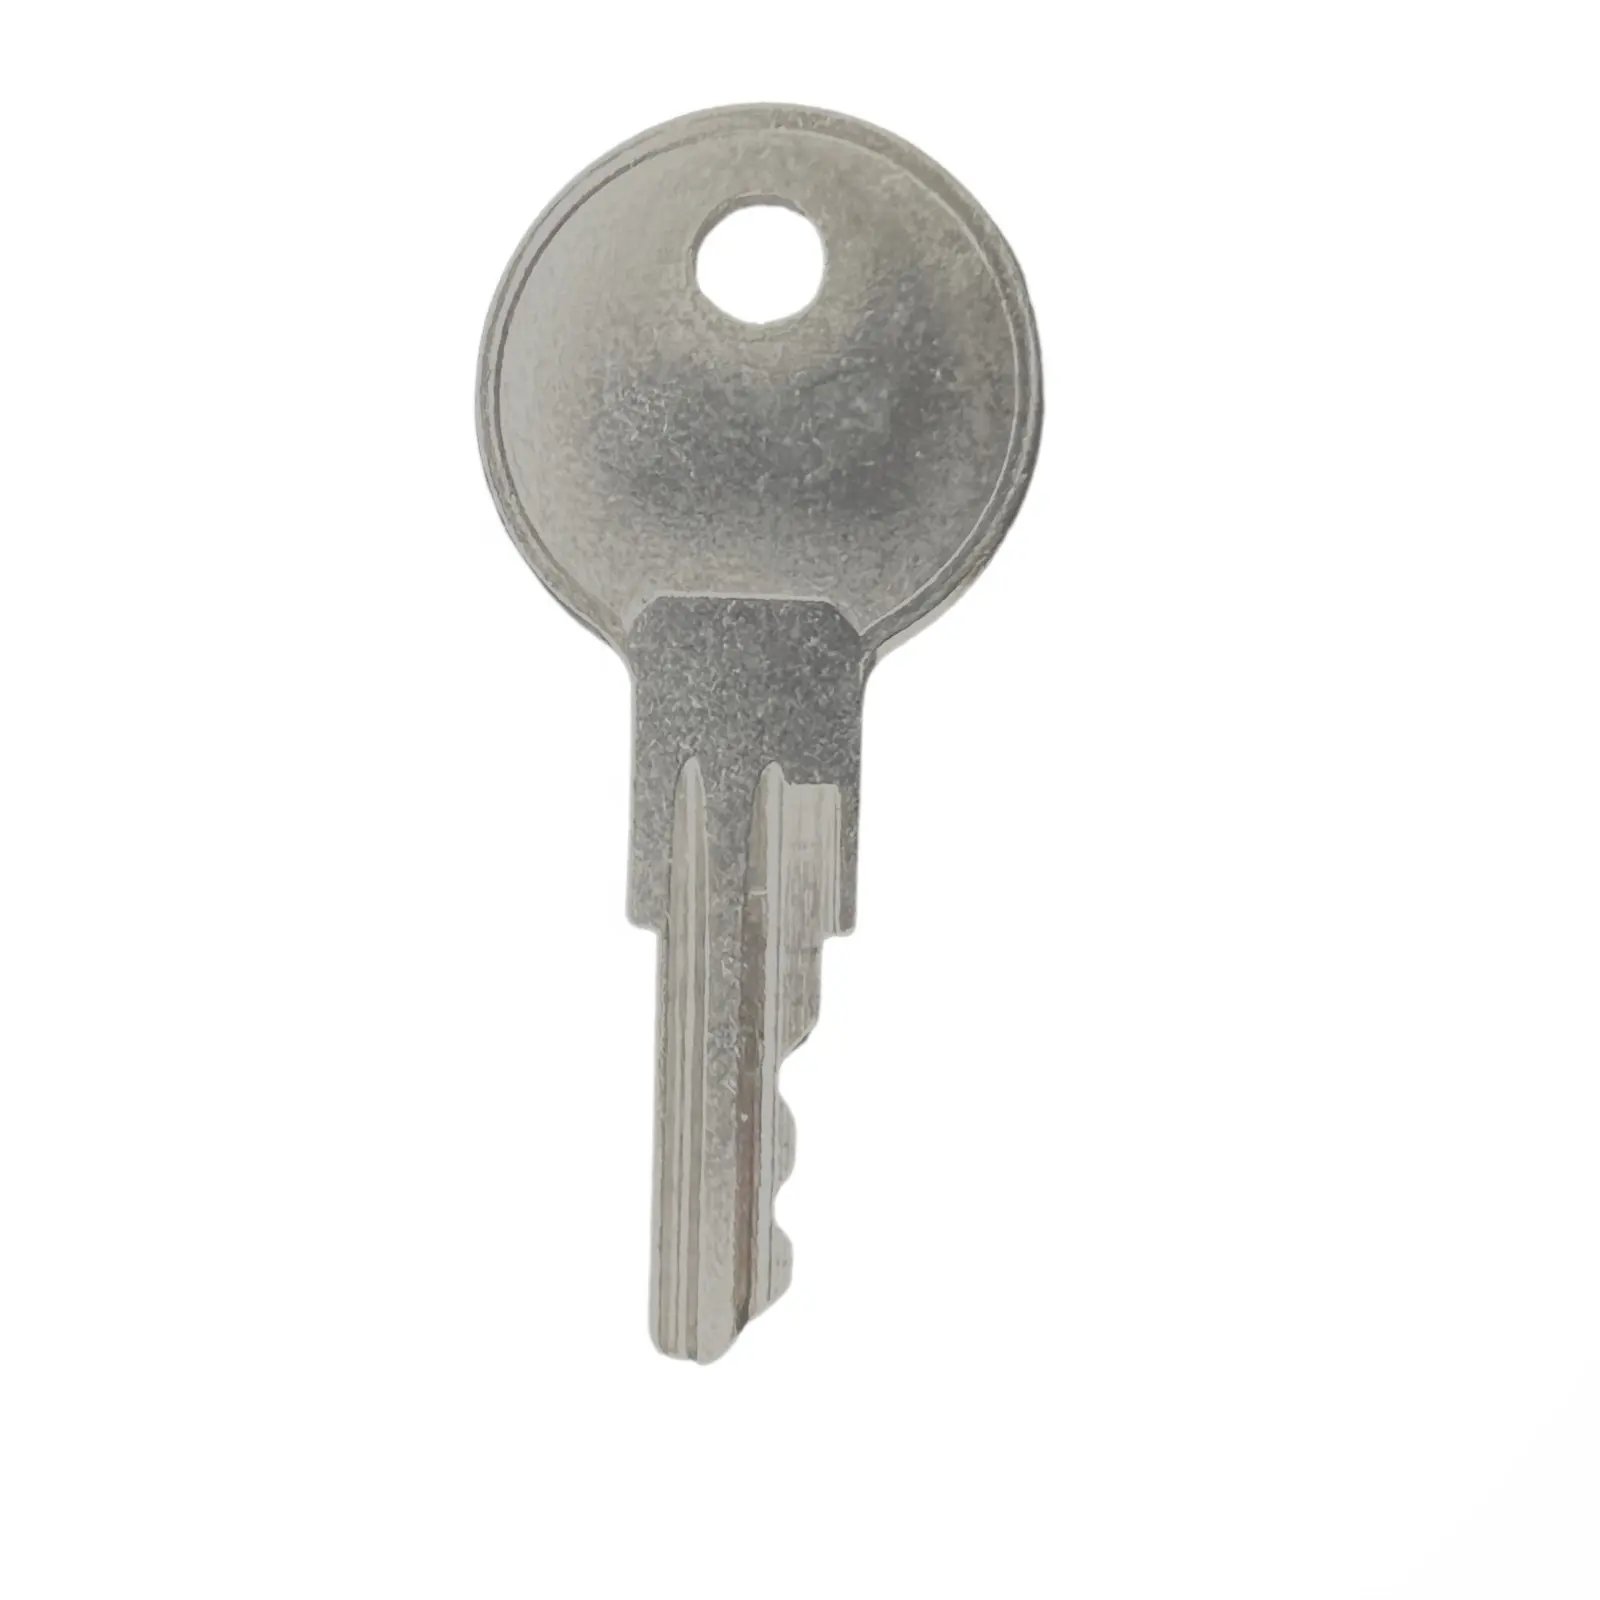 Schindler Equipment Elevator Inspection Access Key 0C01 Single Bitted Key